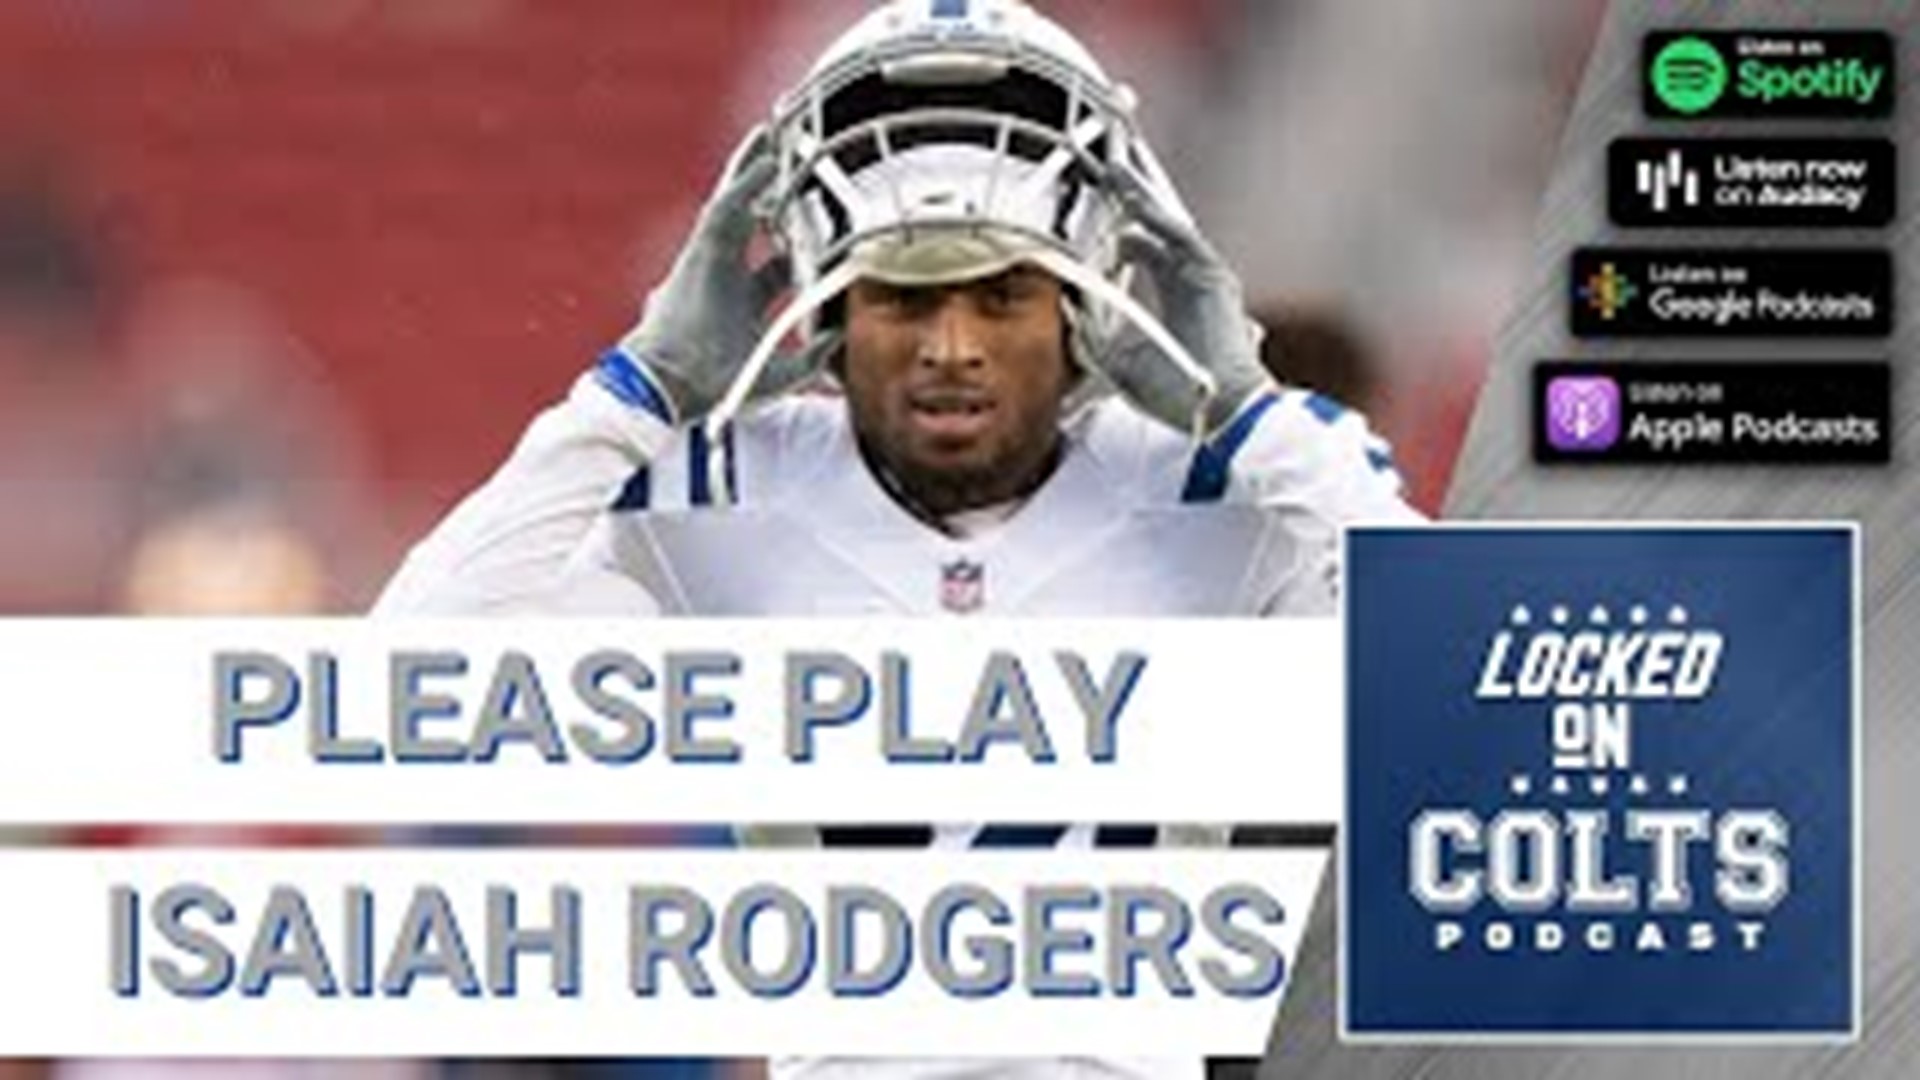 Will Isaiah Rodgers Sr See the Field in Week 3?, Locked On Colts